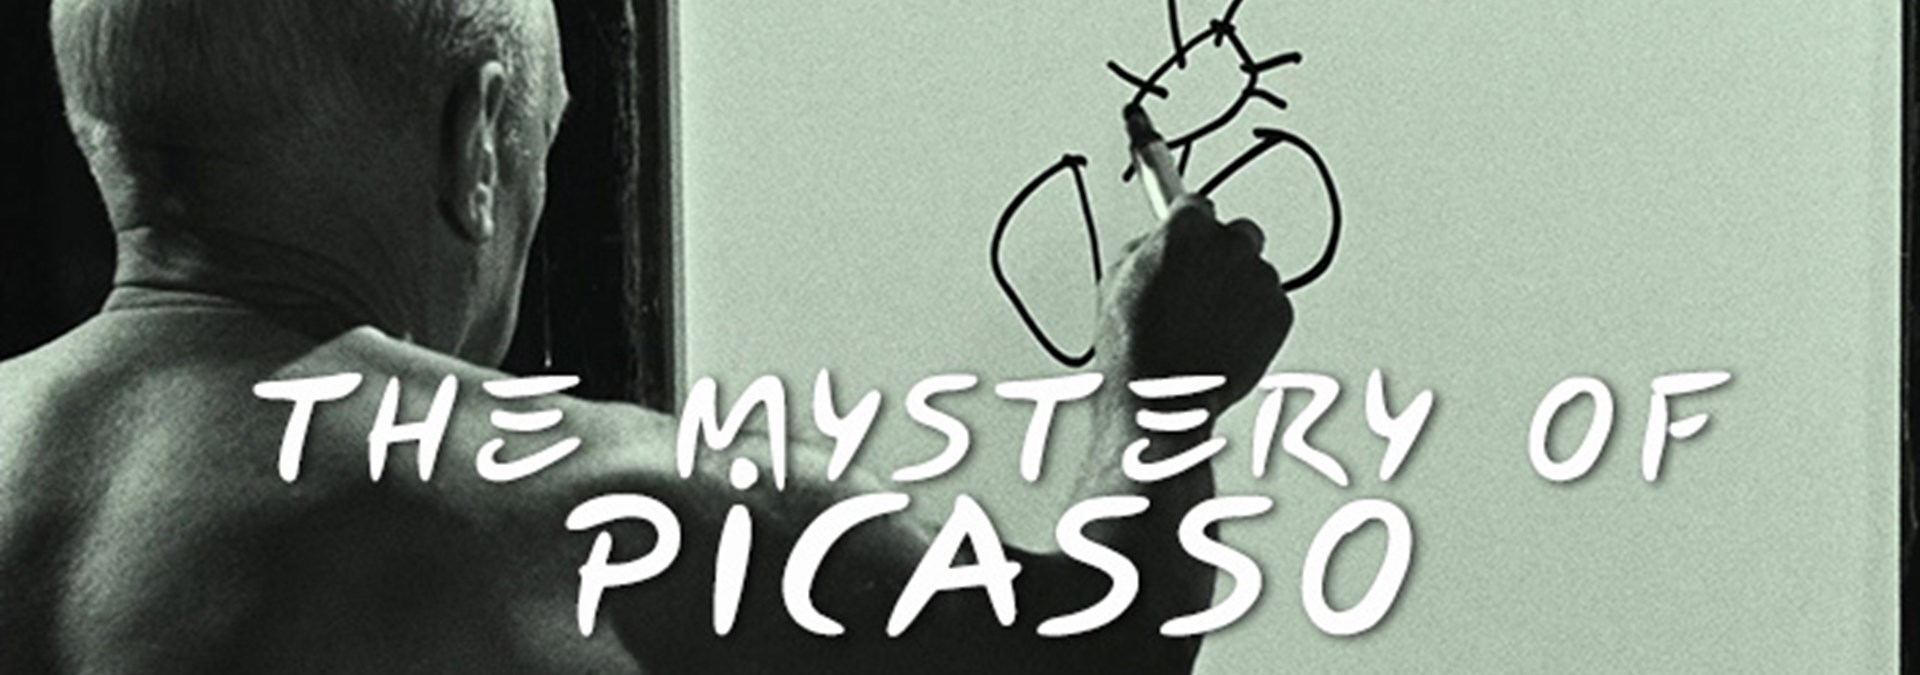 Still Cinema Amstelveen The Mystery Of Picasso1